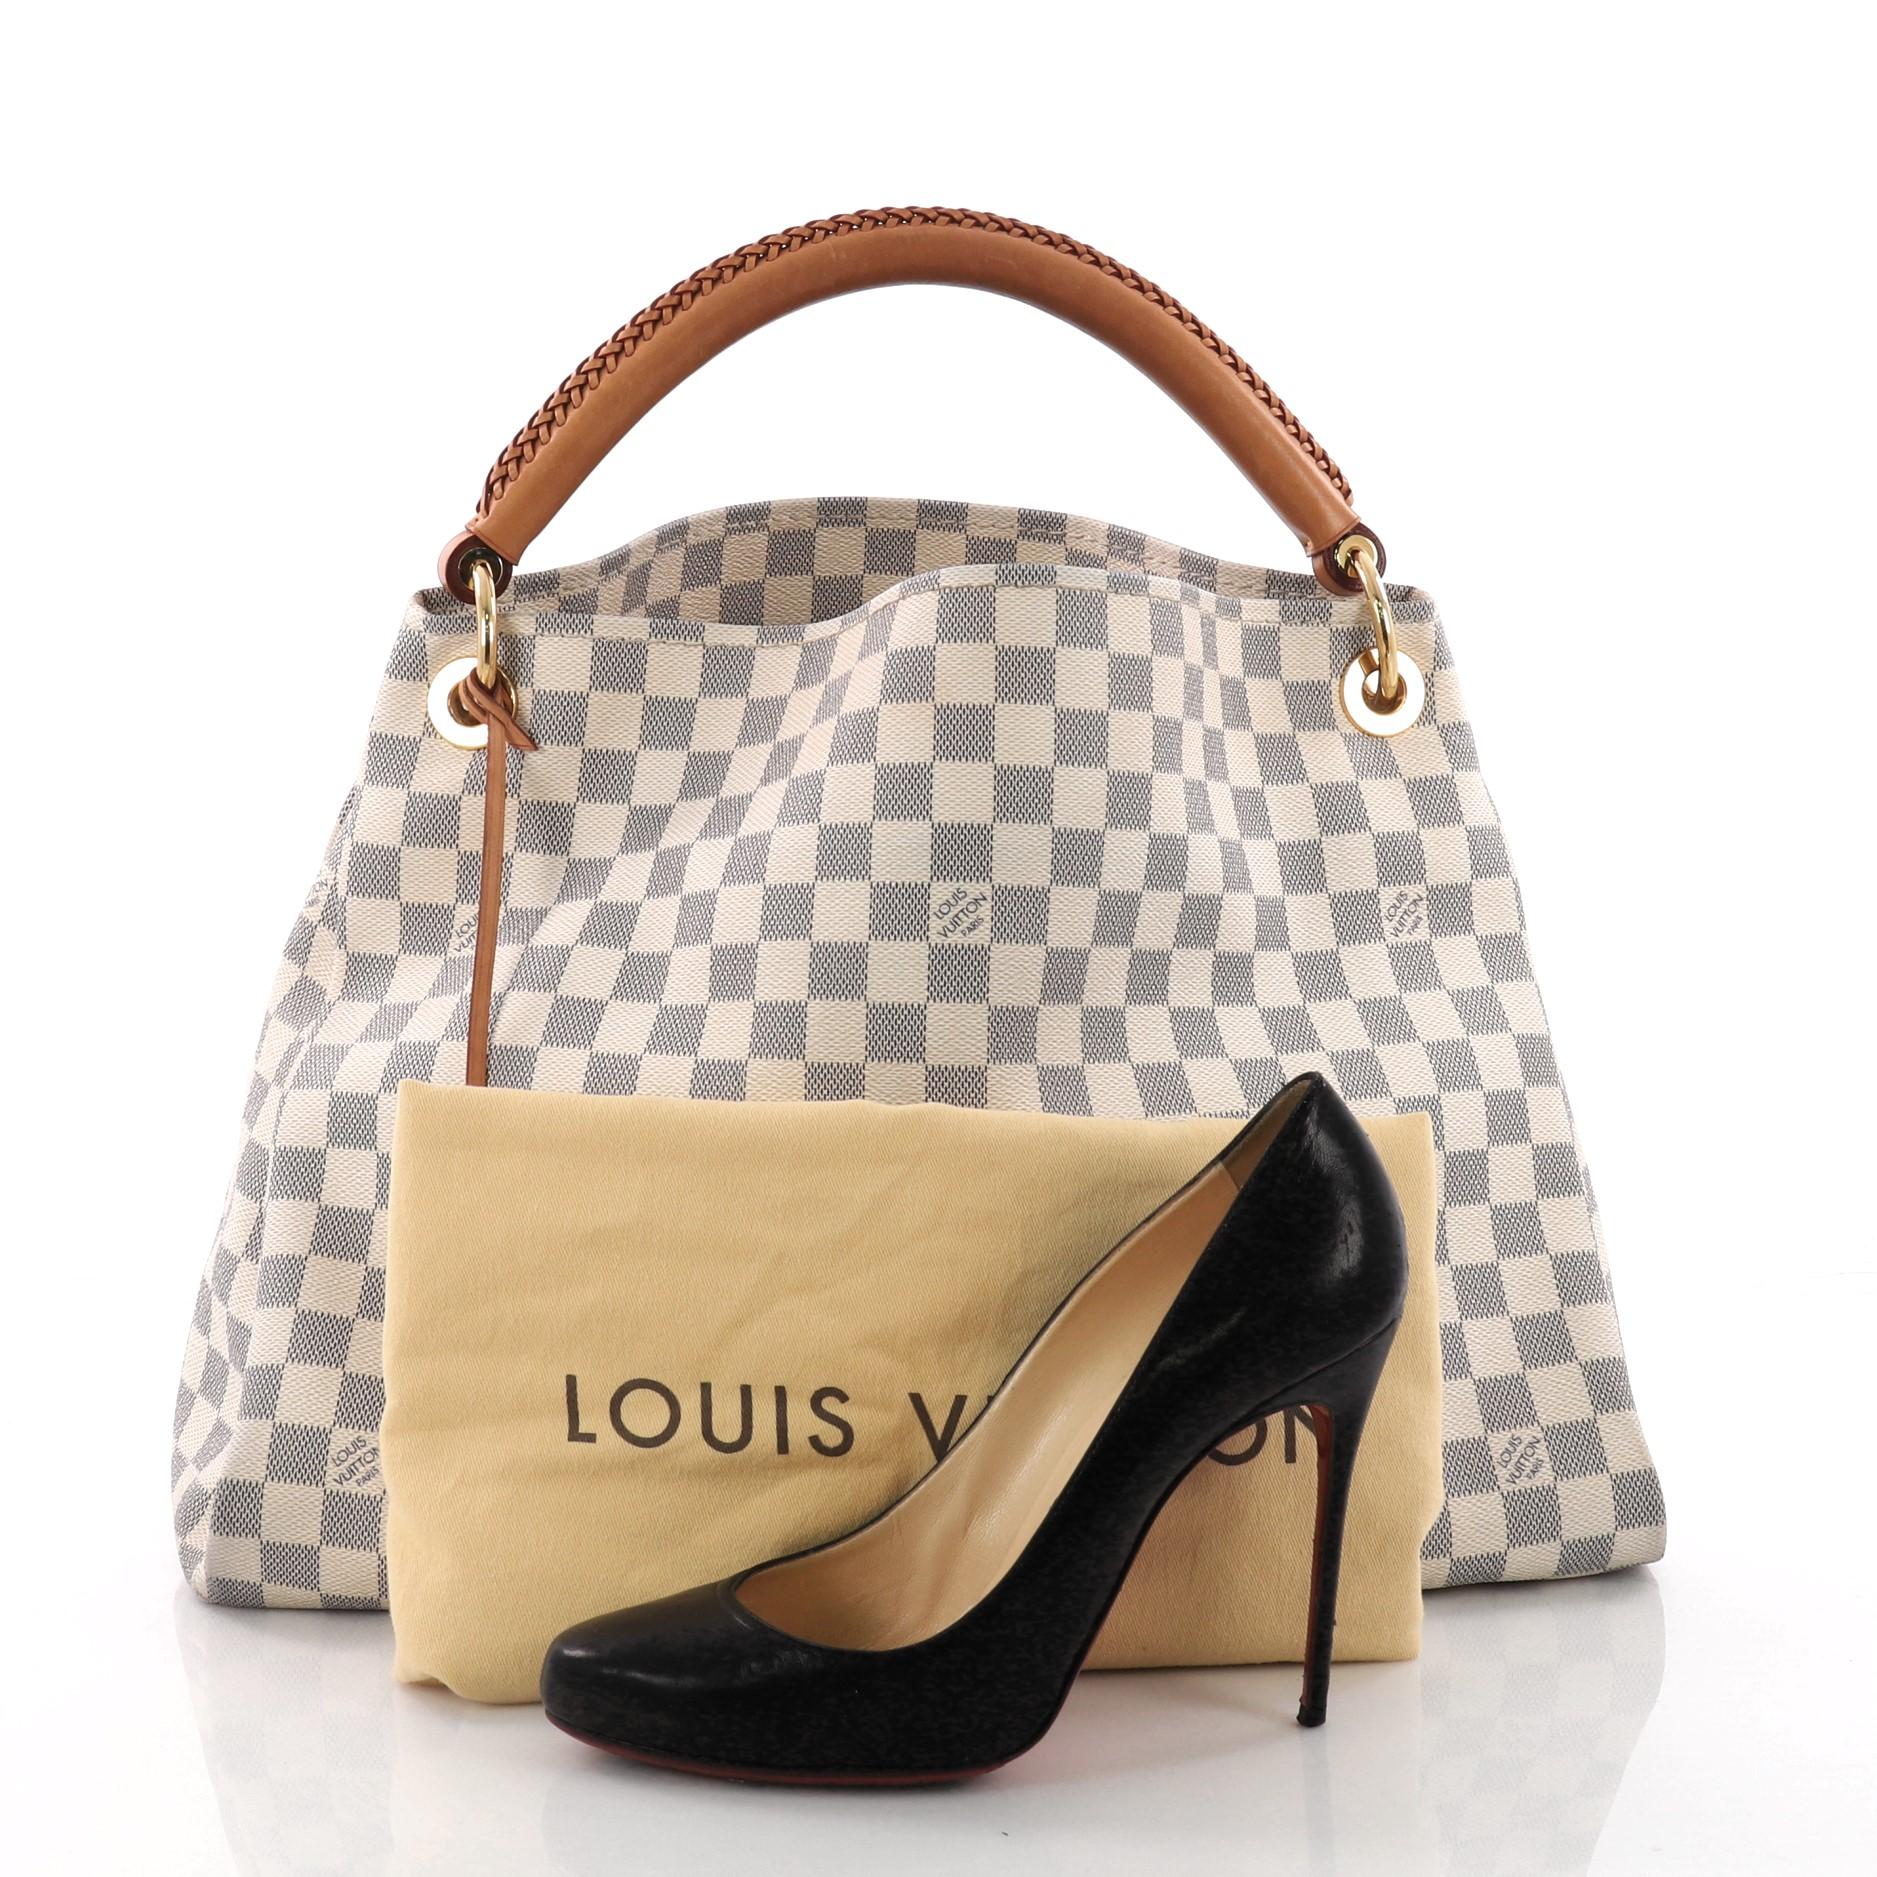 This authentic Louis Vuitton Artsy Handbag Damier MM is an elegant and iconic bag that adds a stylish flair to any outfit. Crafted from Louis Vuitton's damier azur coated canvas, this Artsy hobo features single looped hand-crafted leather handle,